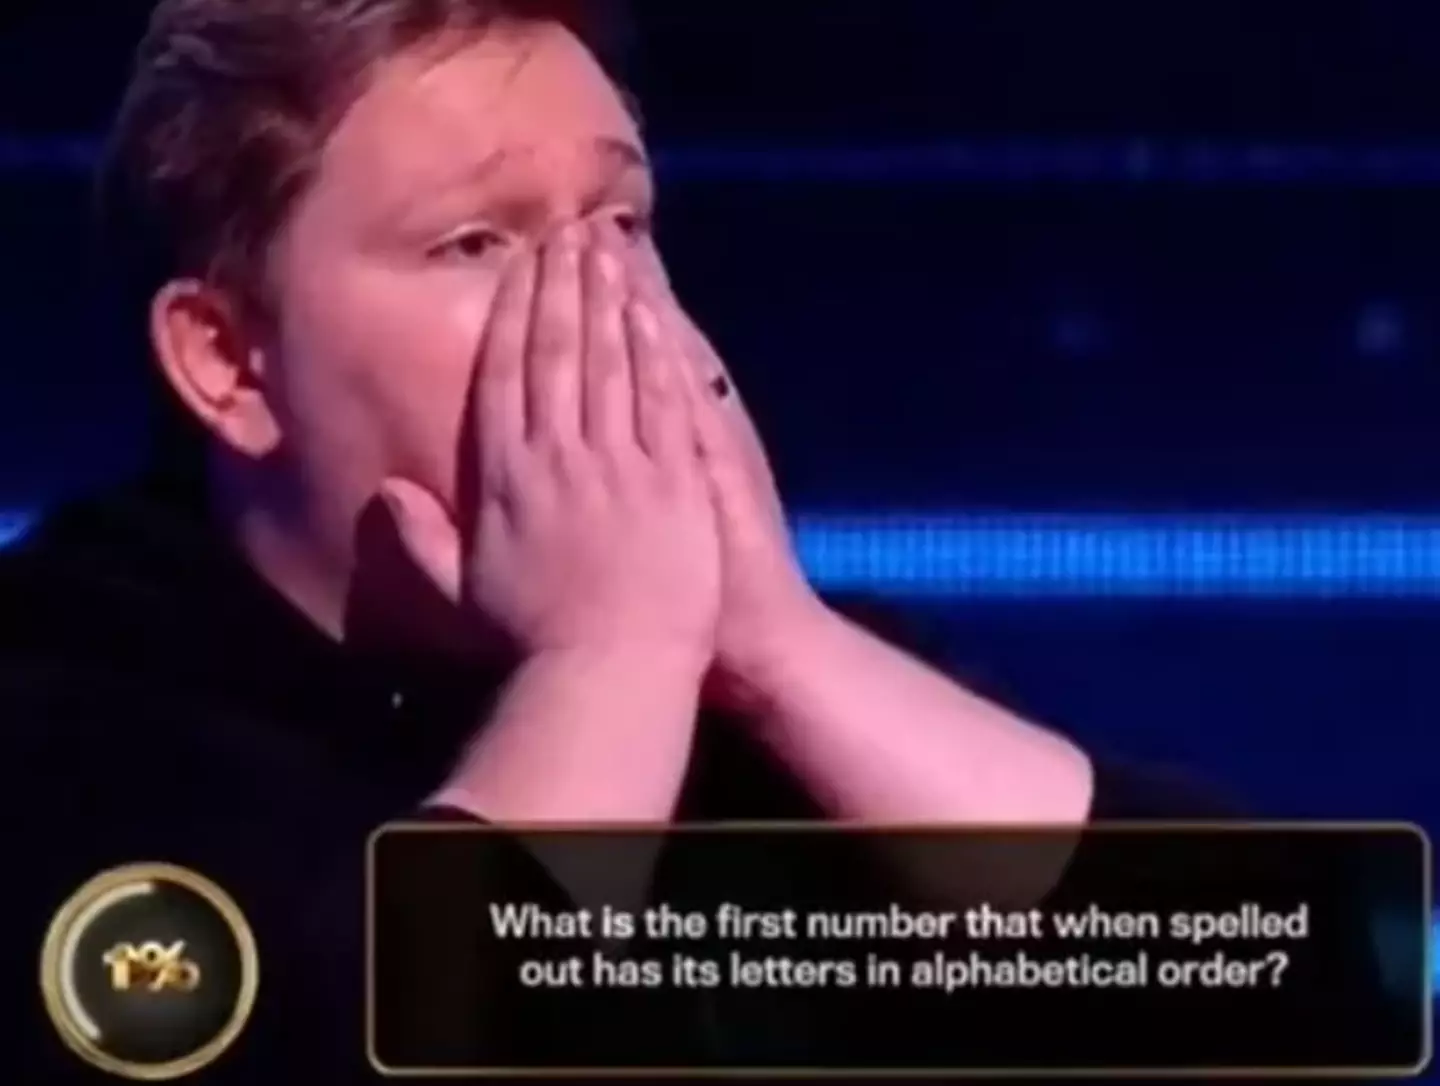 Ellior couldn't believe he failed to get the last question right.